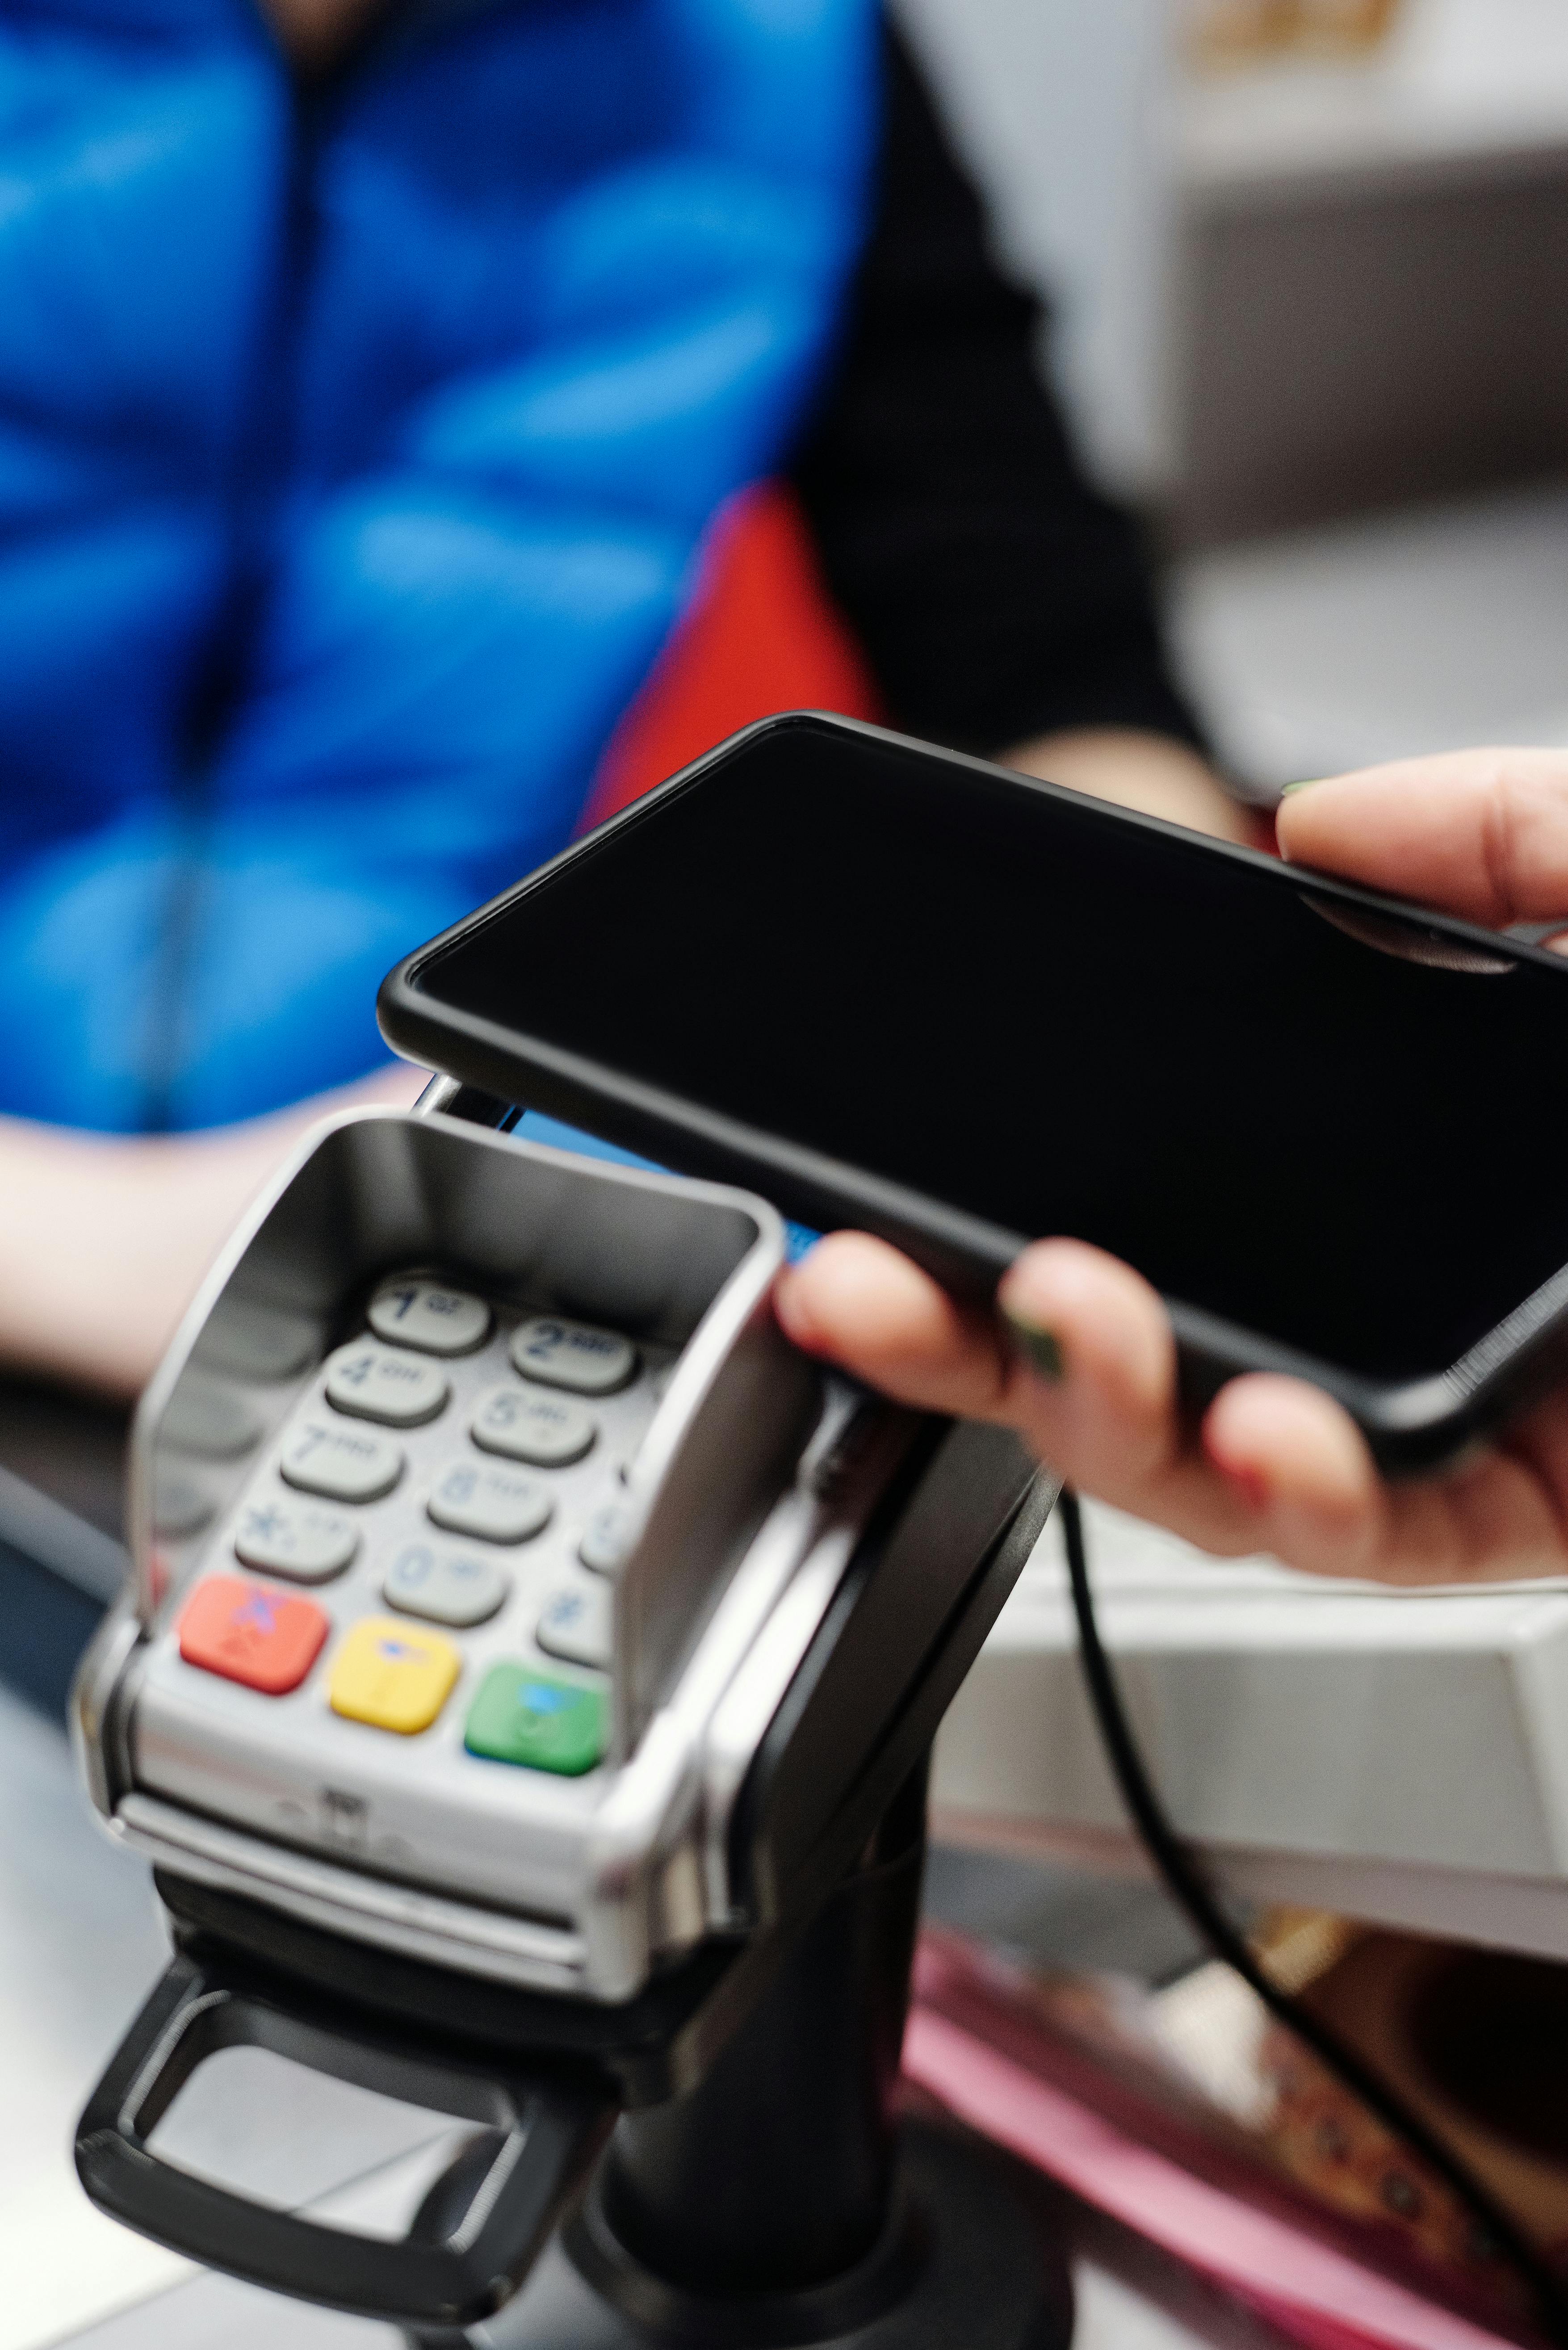 making a payment with a smartphone